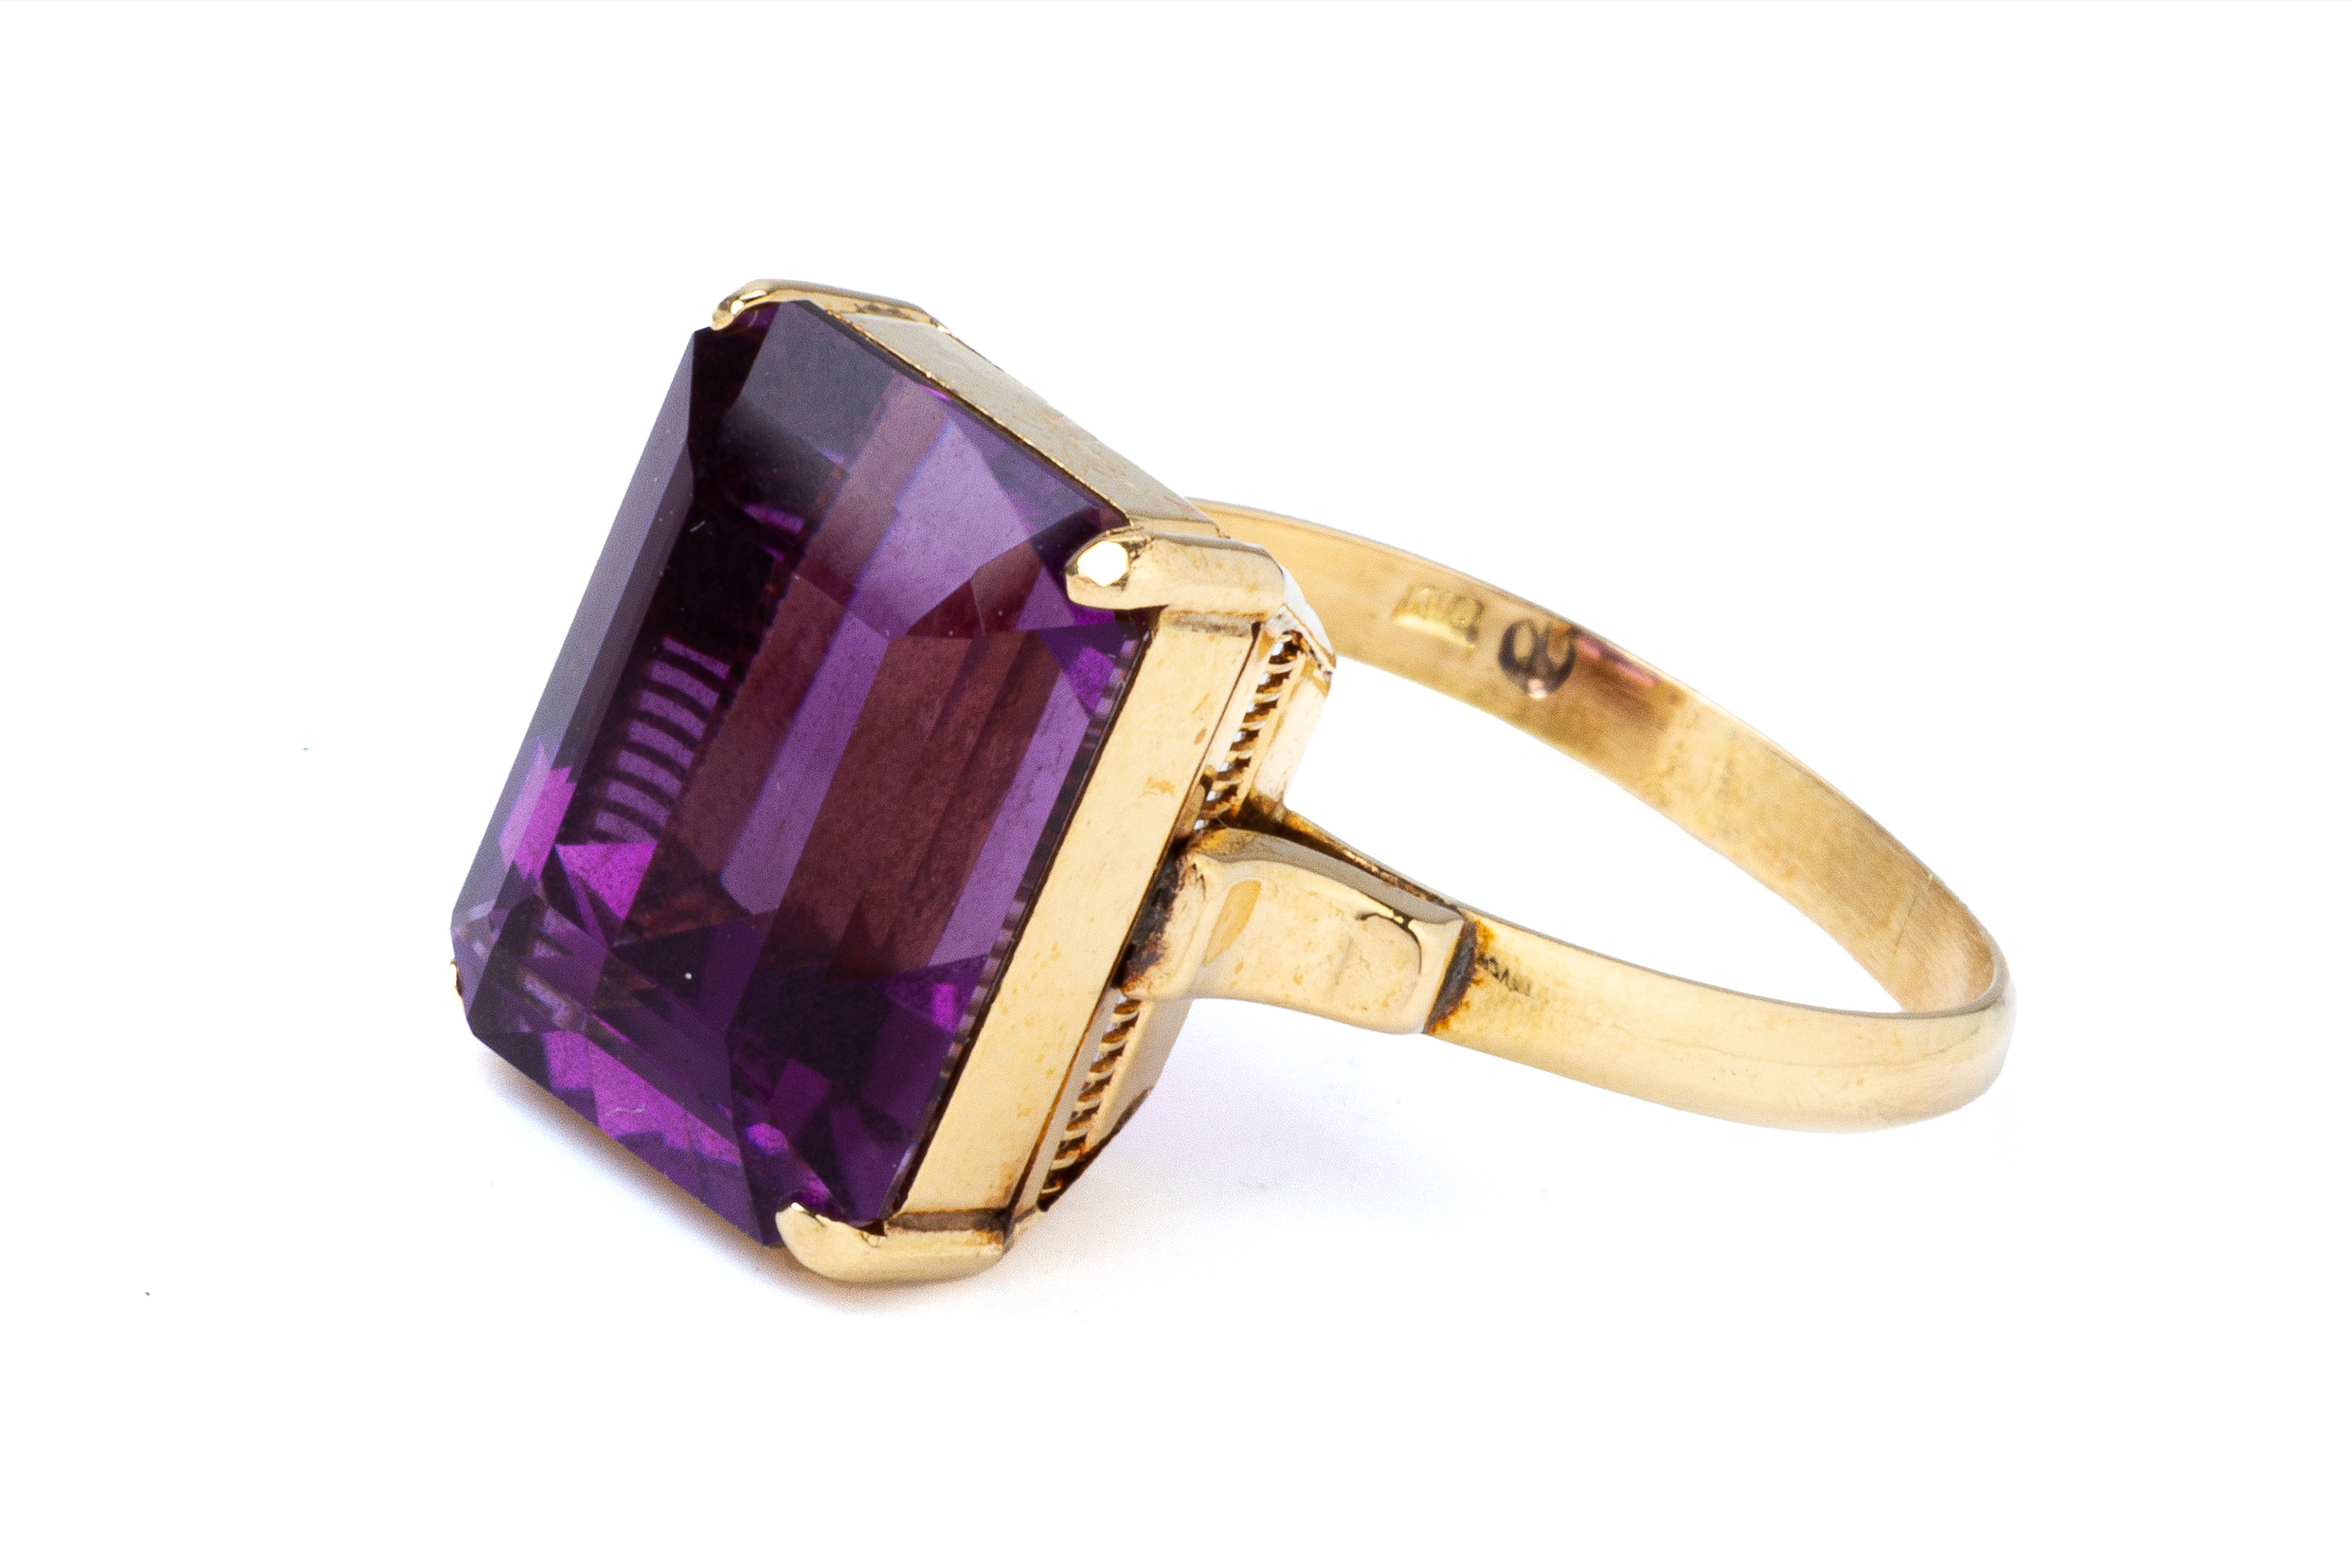 AN AMETHYST SINGLE STONE RING - Image 2 of 4